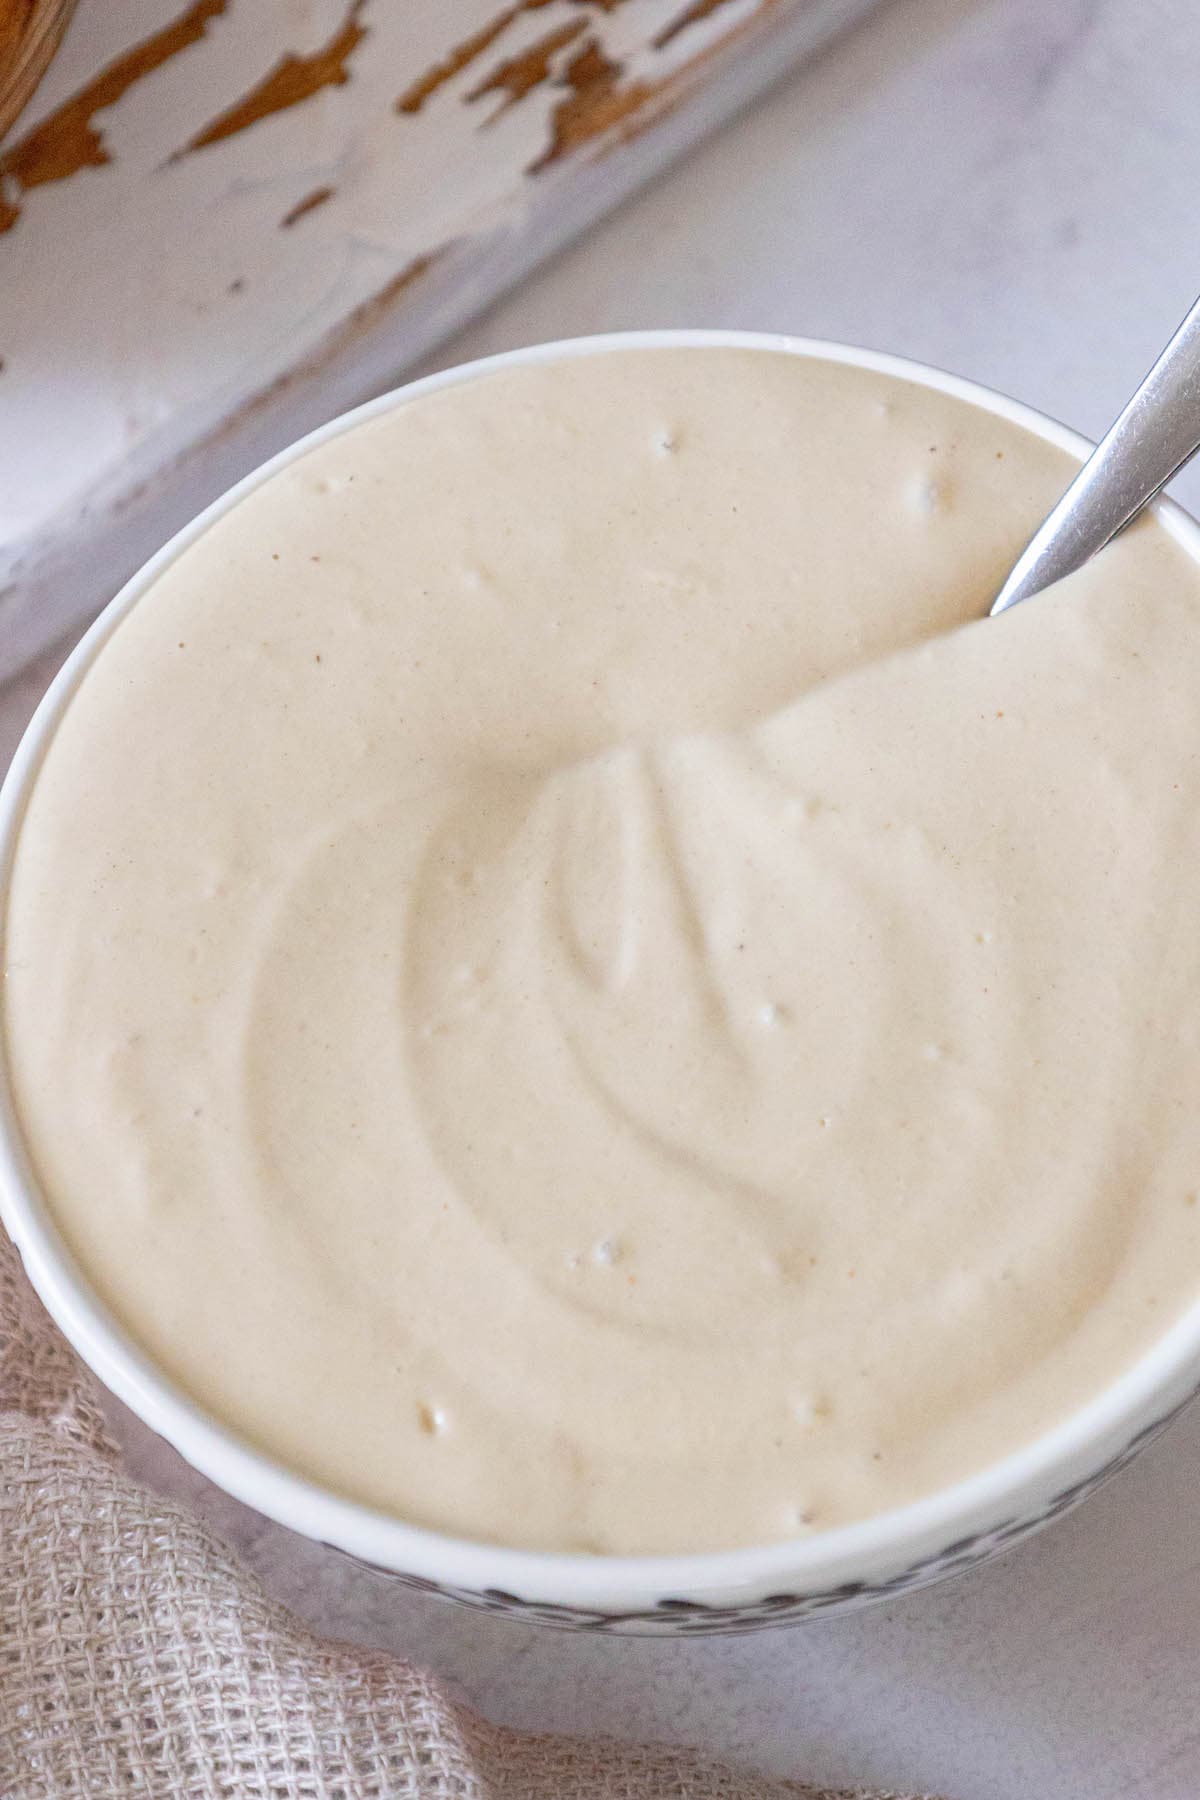 a spoon in a bowl of tahini sauce on a table